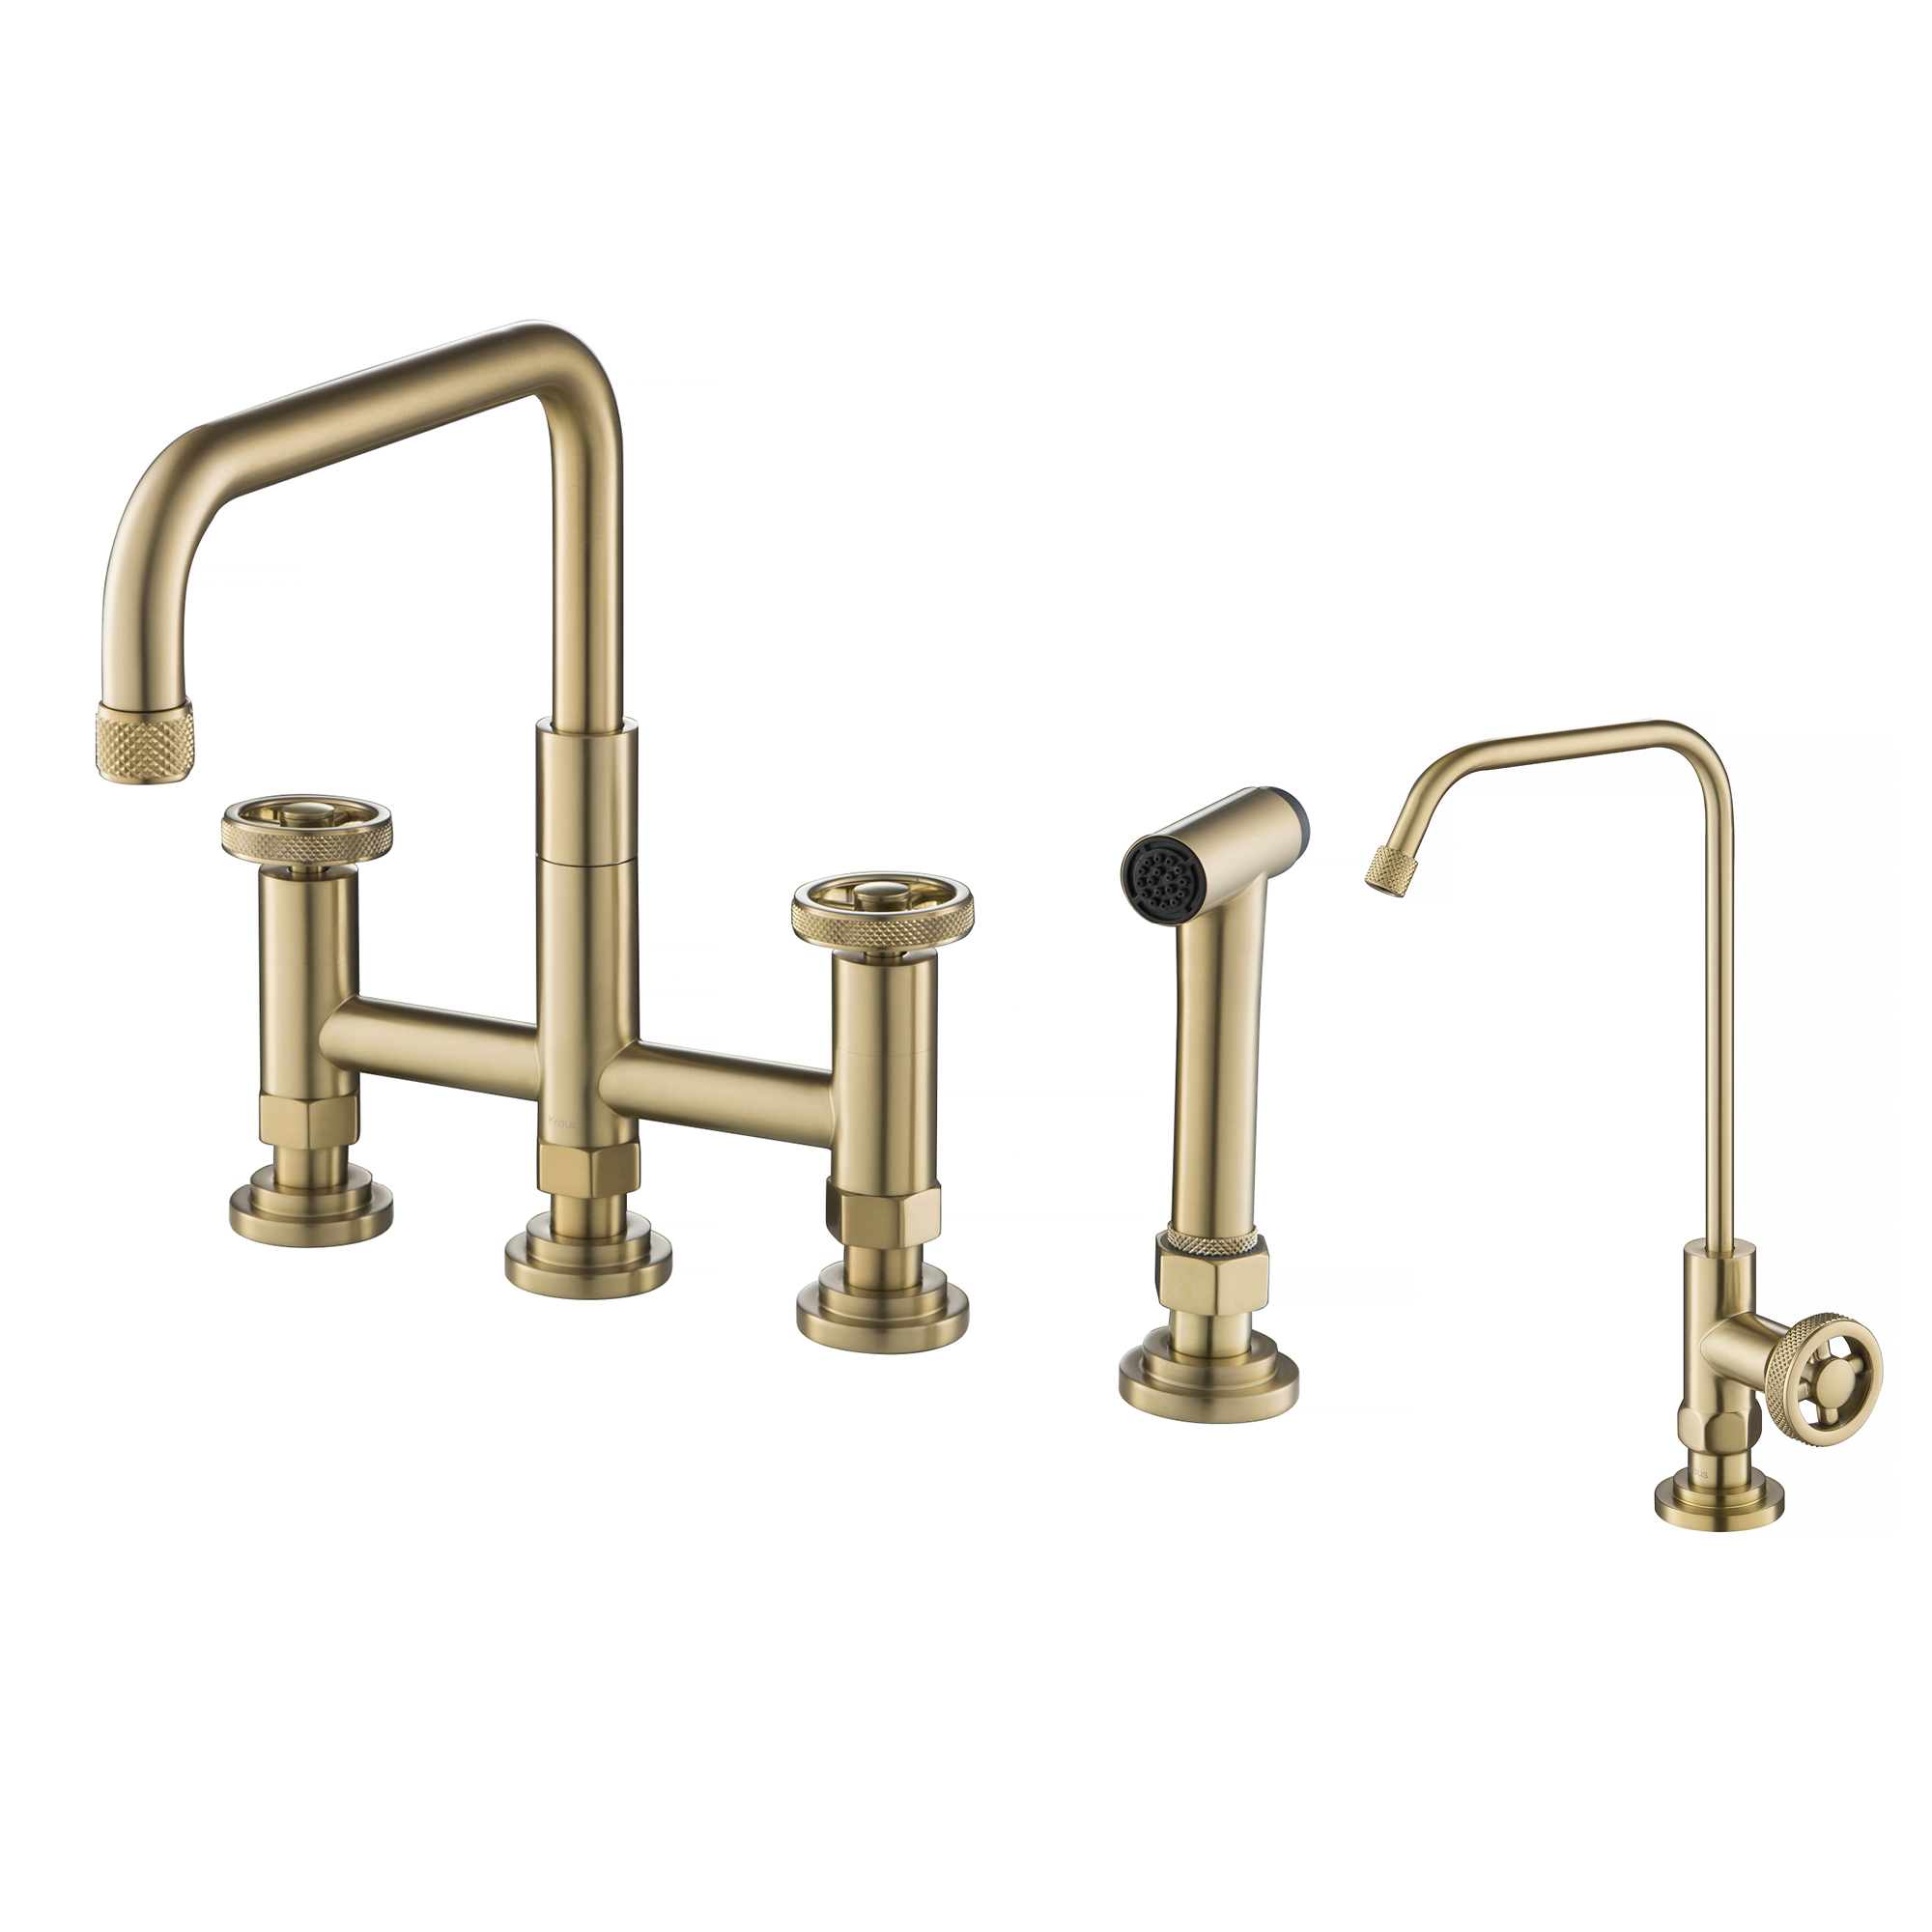 KRAUS Urbix™ Industrial Bridge Kitchen Faucet and Water Filter Faucet Combo in Brushed Gold - image 1 of 12